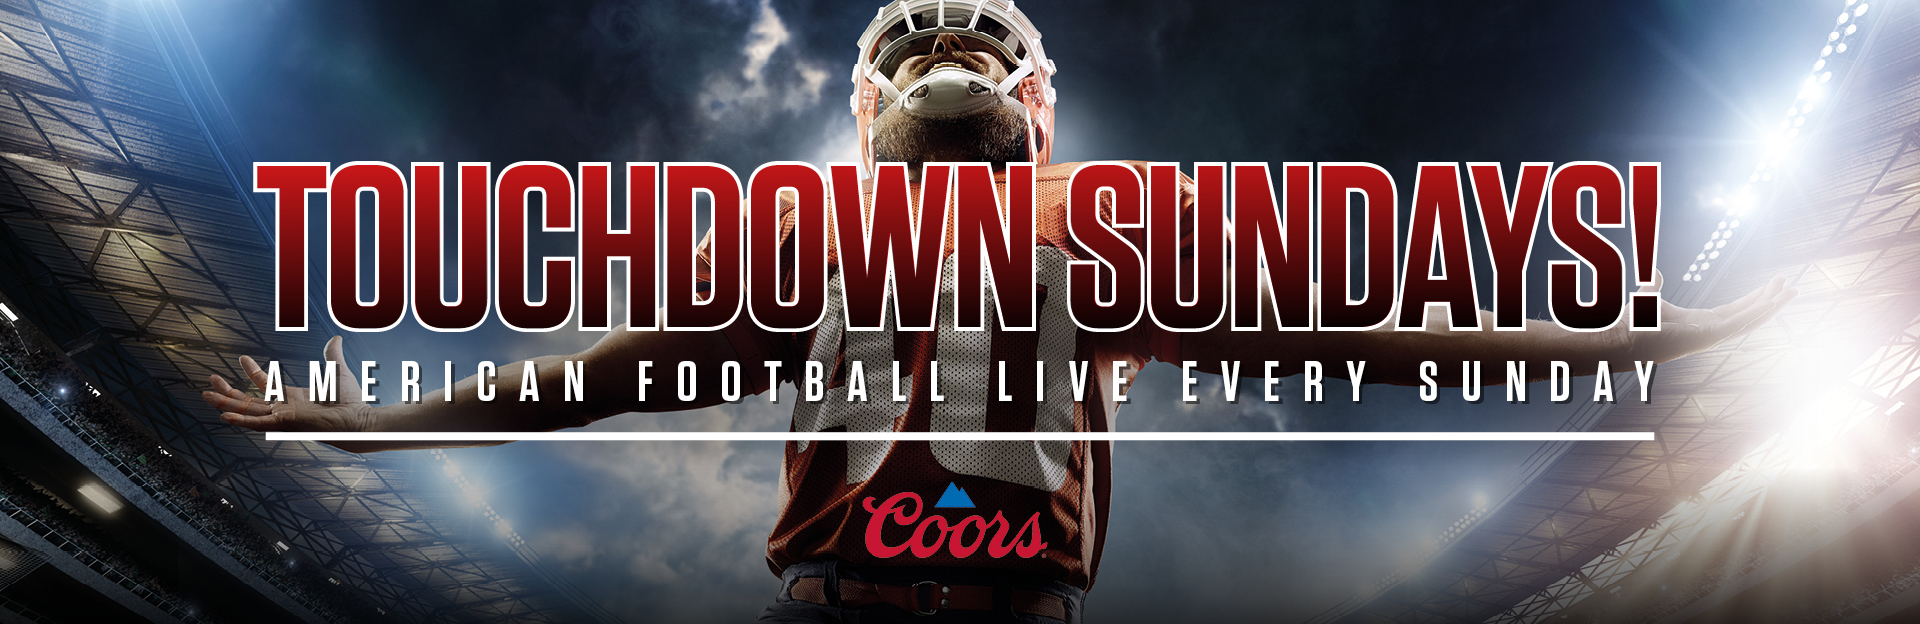 Watch NFL at Monkseaton Arms